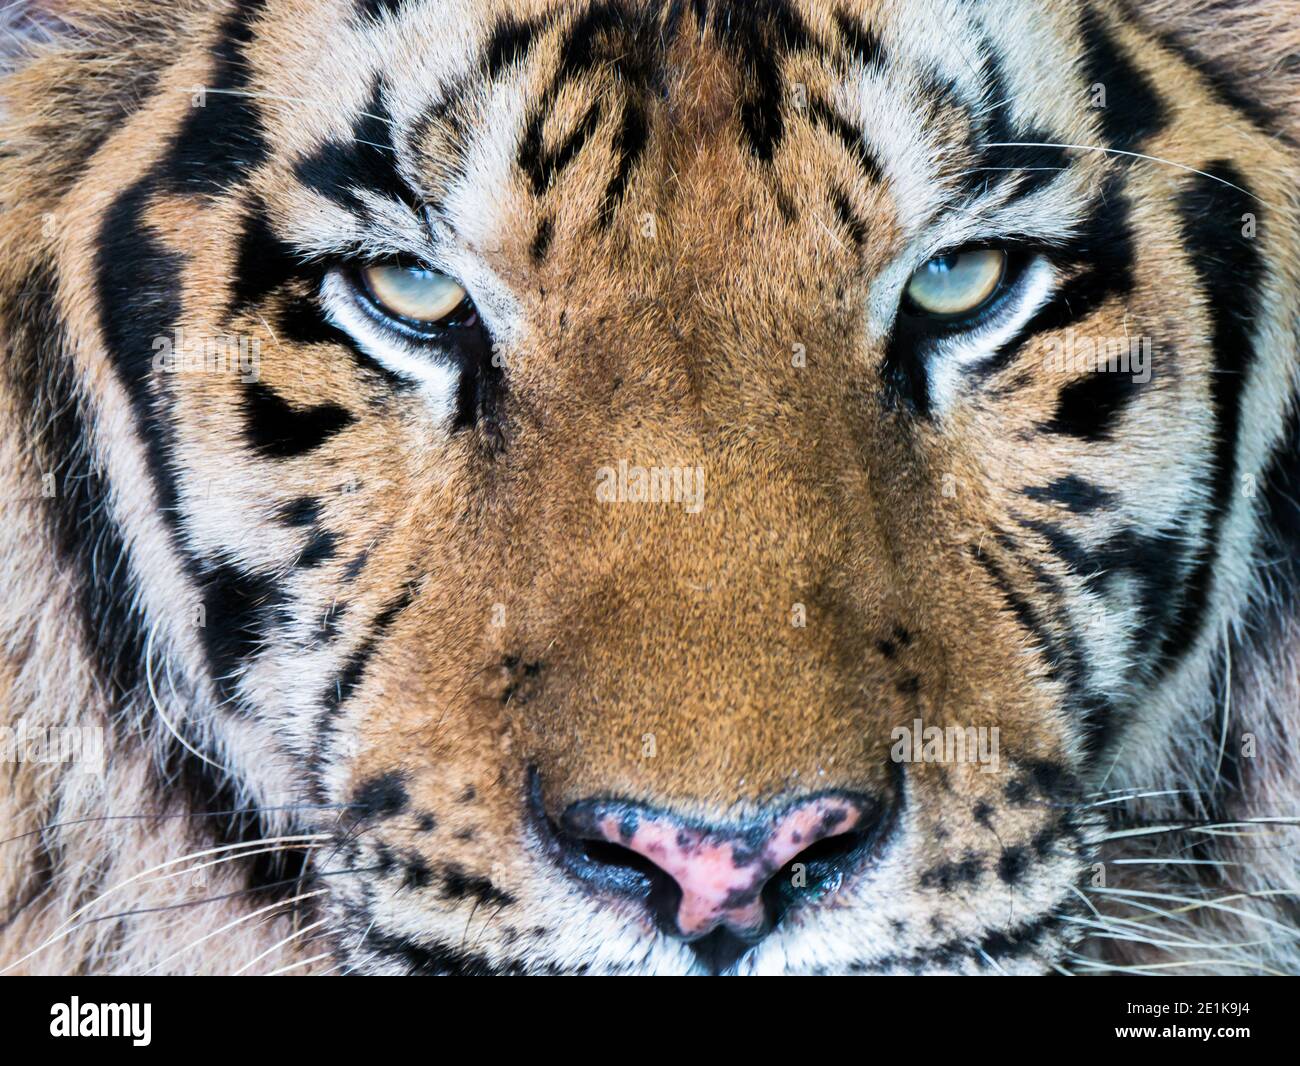 Tiger face with eyes concentrate on camera Stock Photo